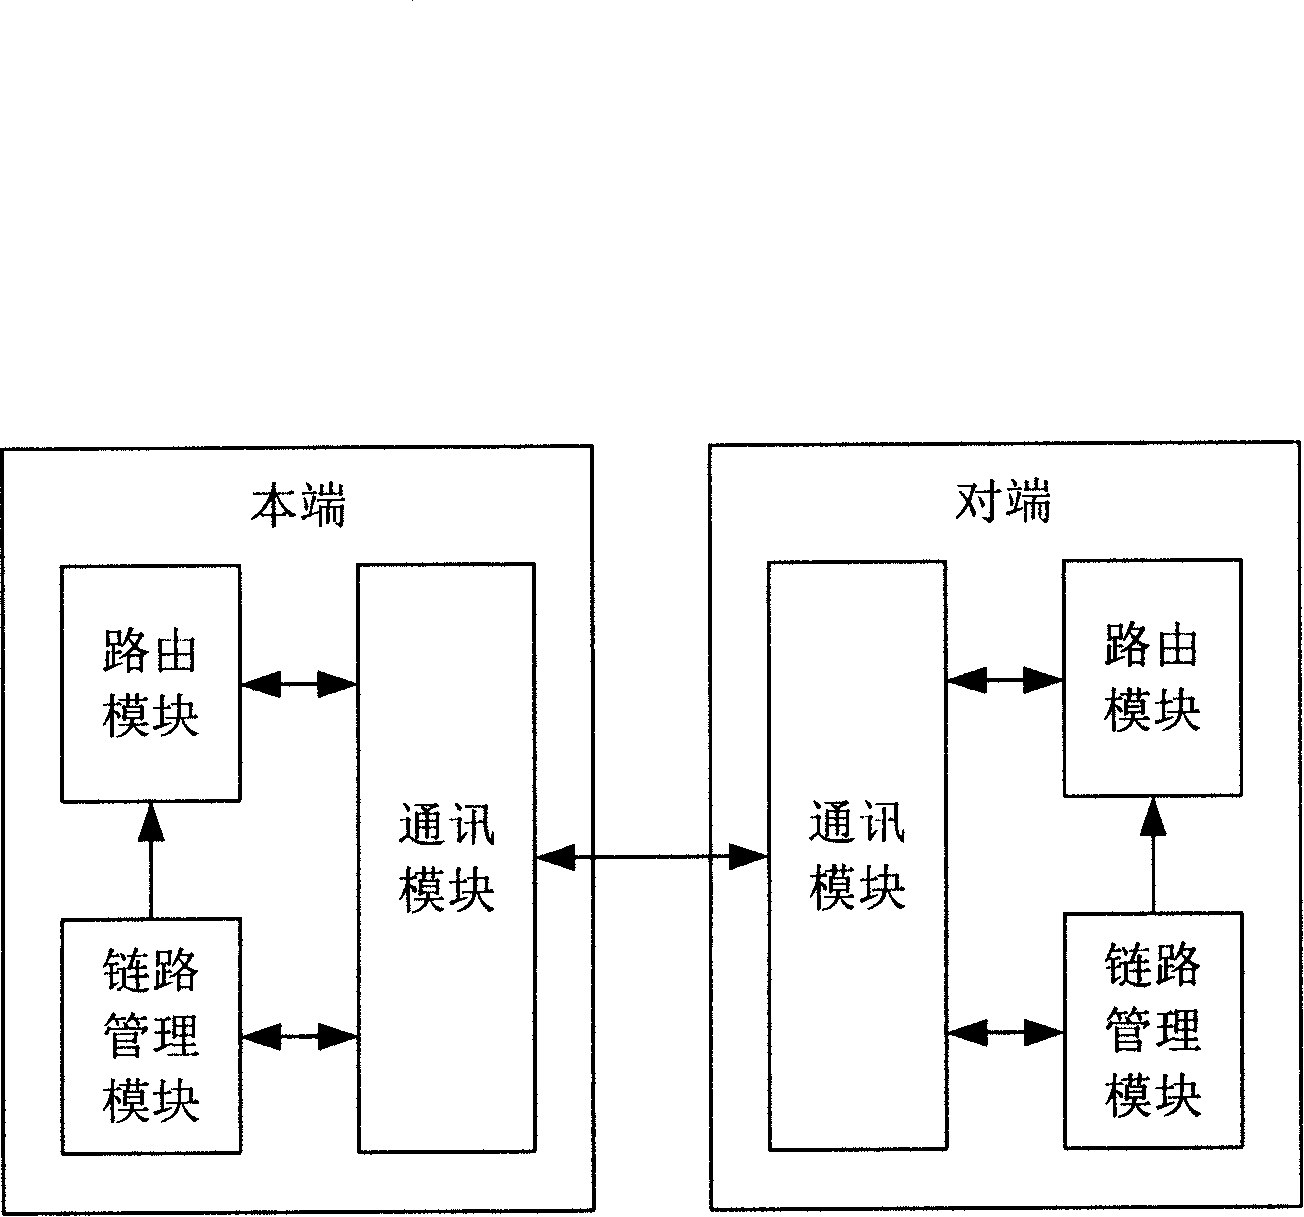 Method and system for service exit of data link